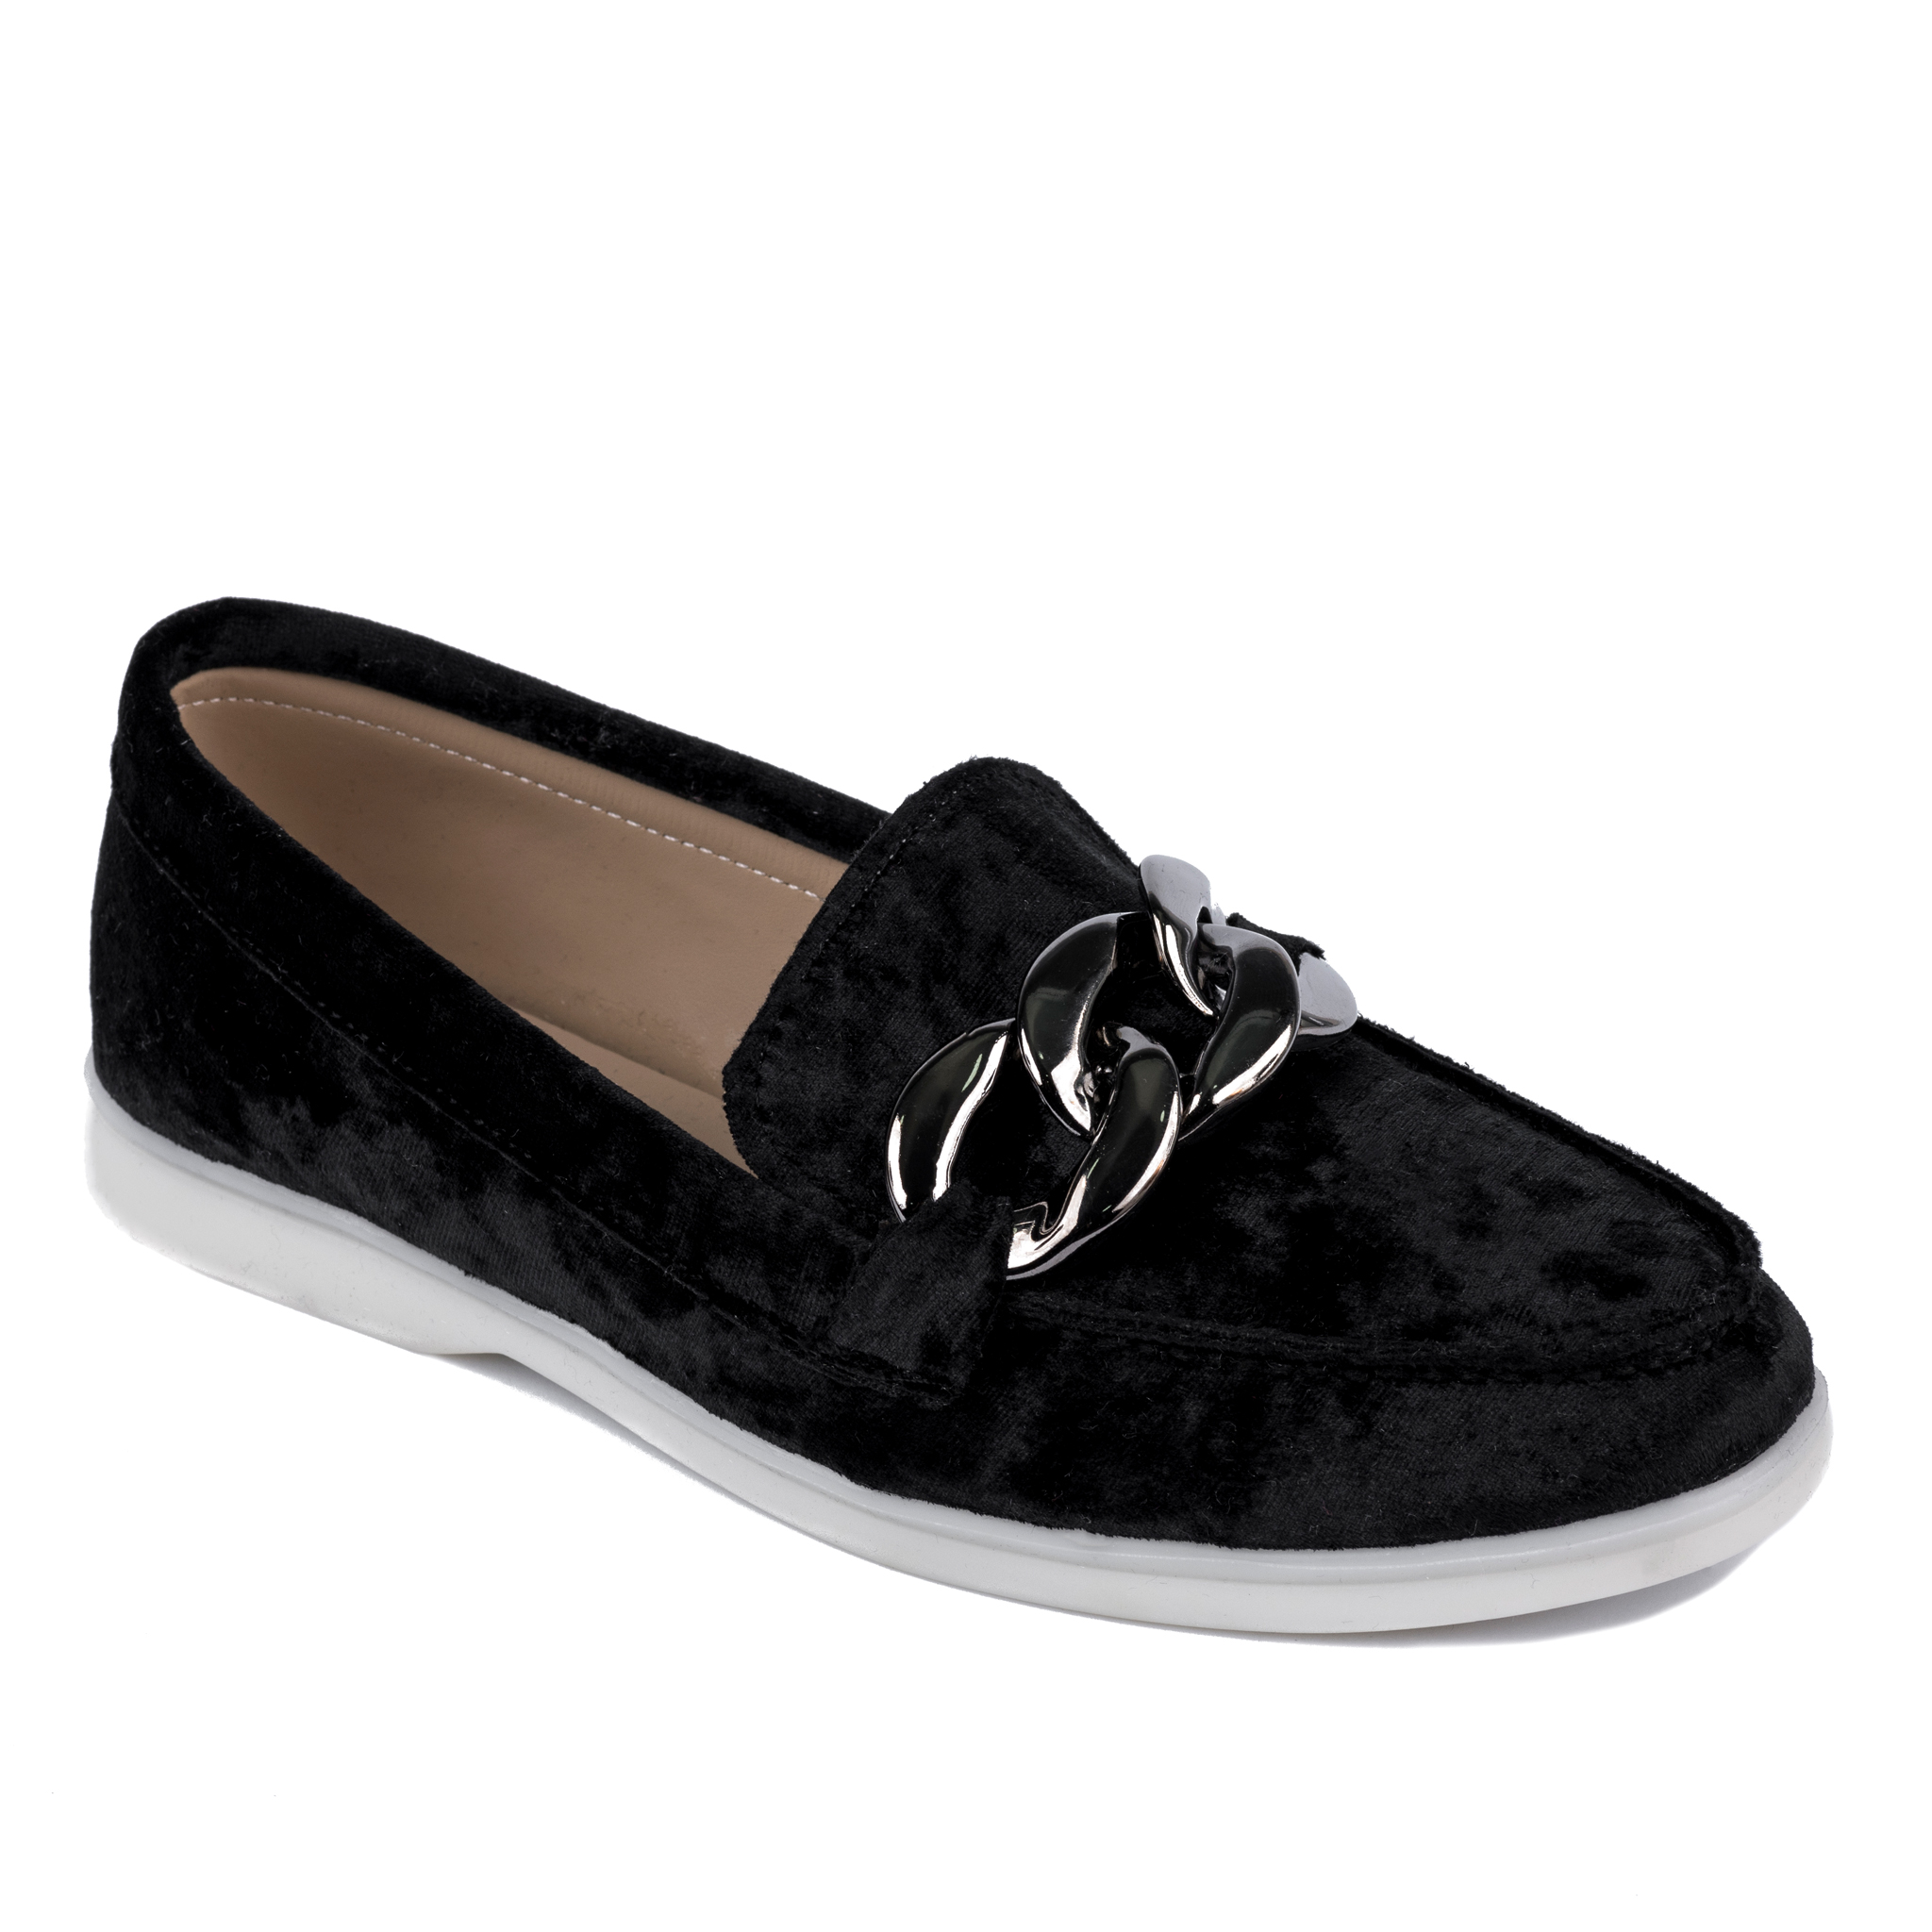 PLUSH MOCCASINS WITH CHAIN - BLACK